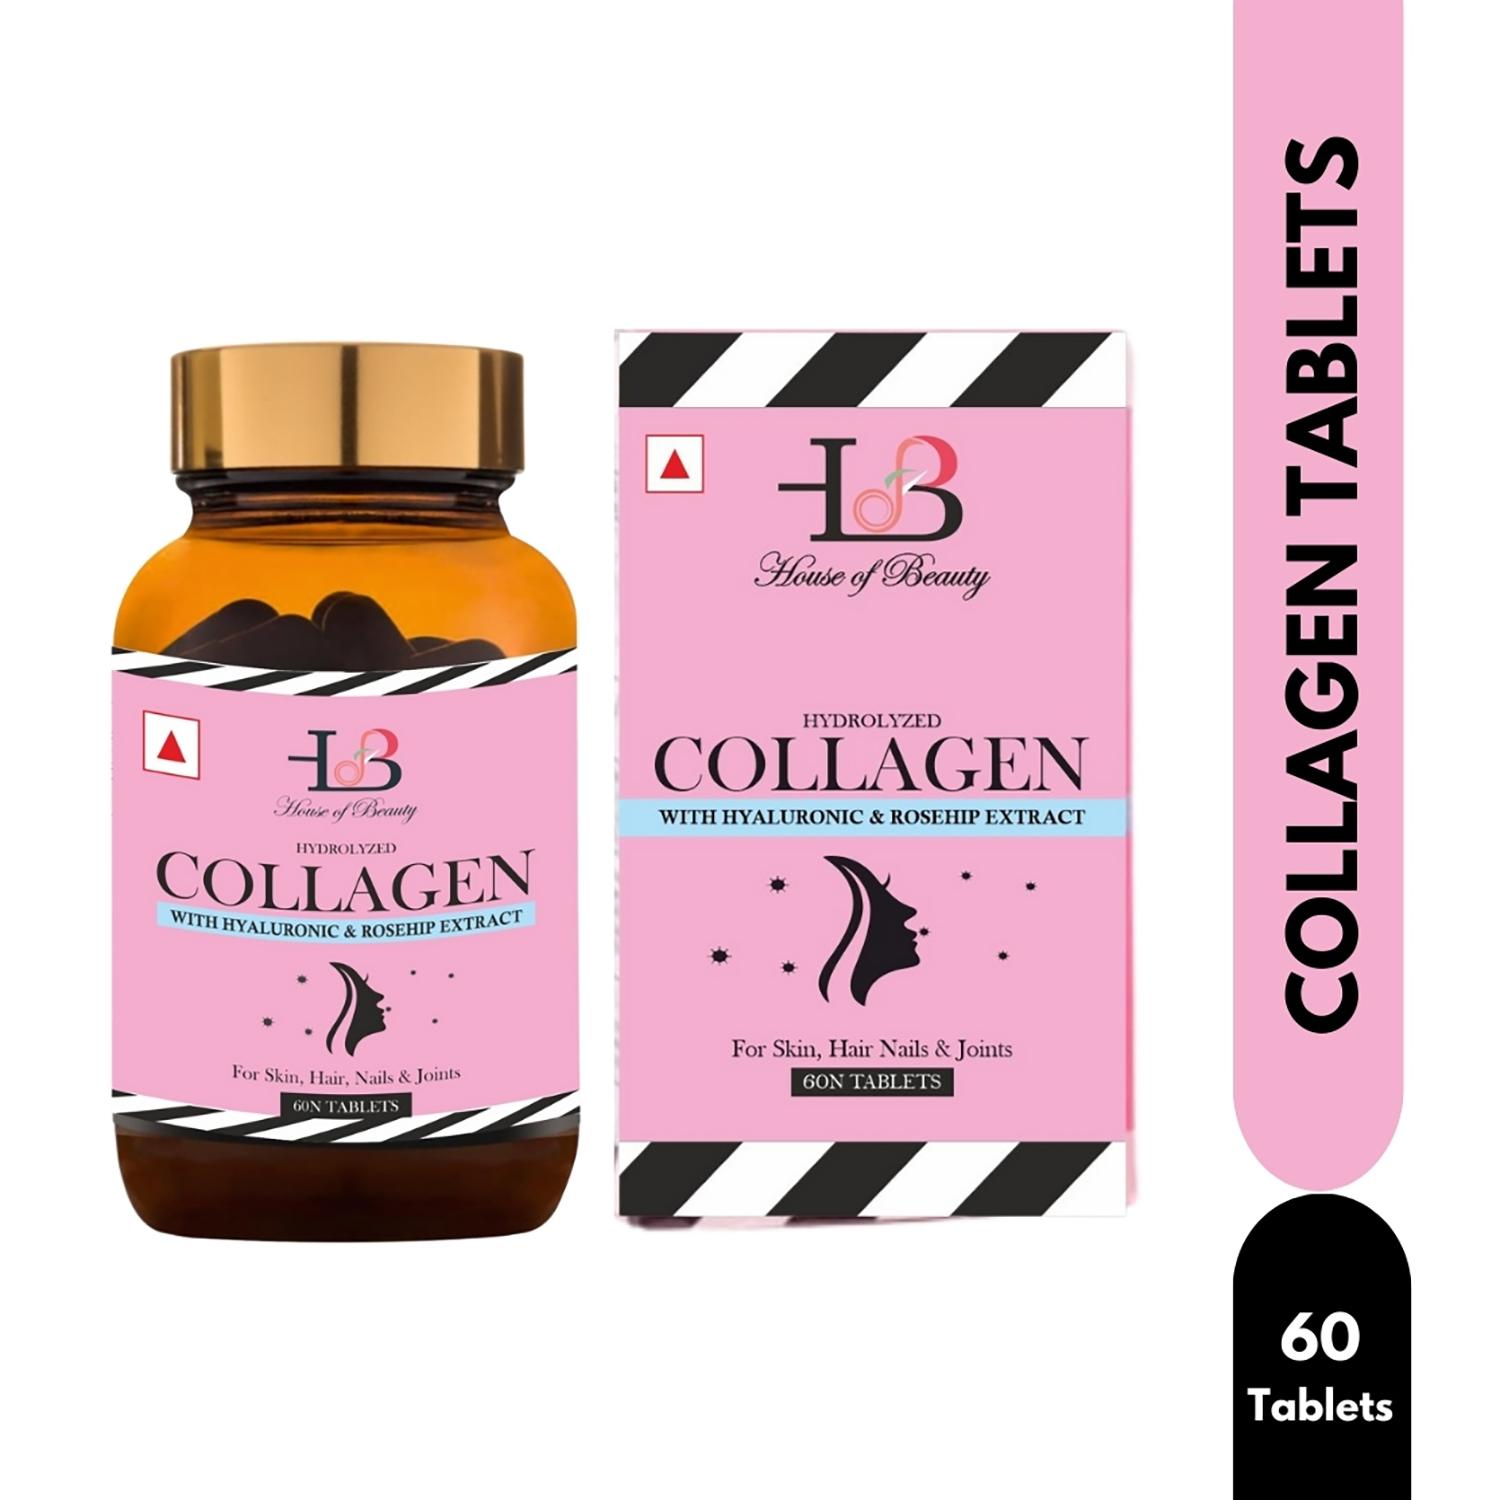 House of Beauty | House of Beauty Collagen Tablets For Tightening, Glowing, Brightening & Spotless Skin (60 Pcs)